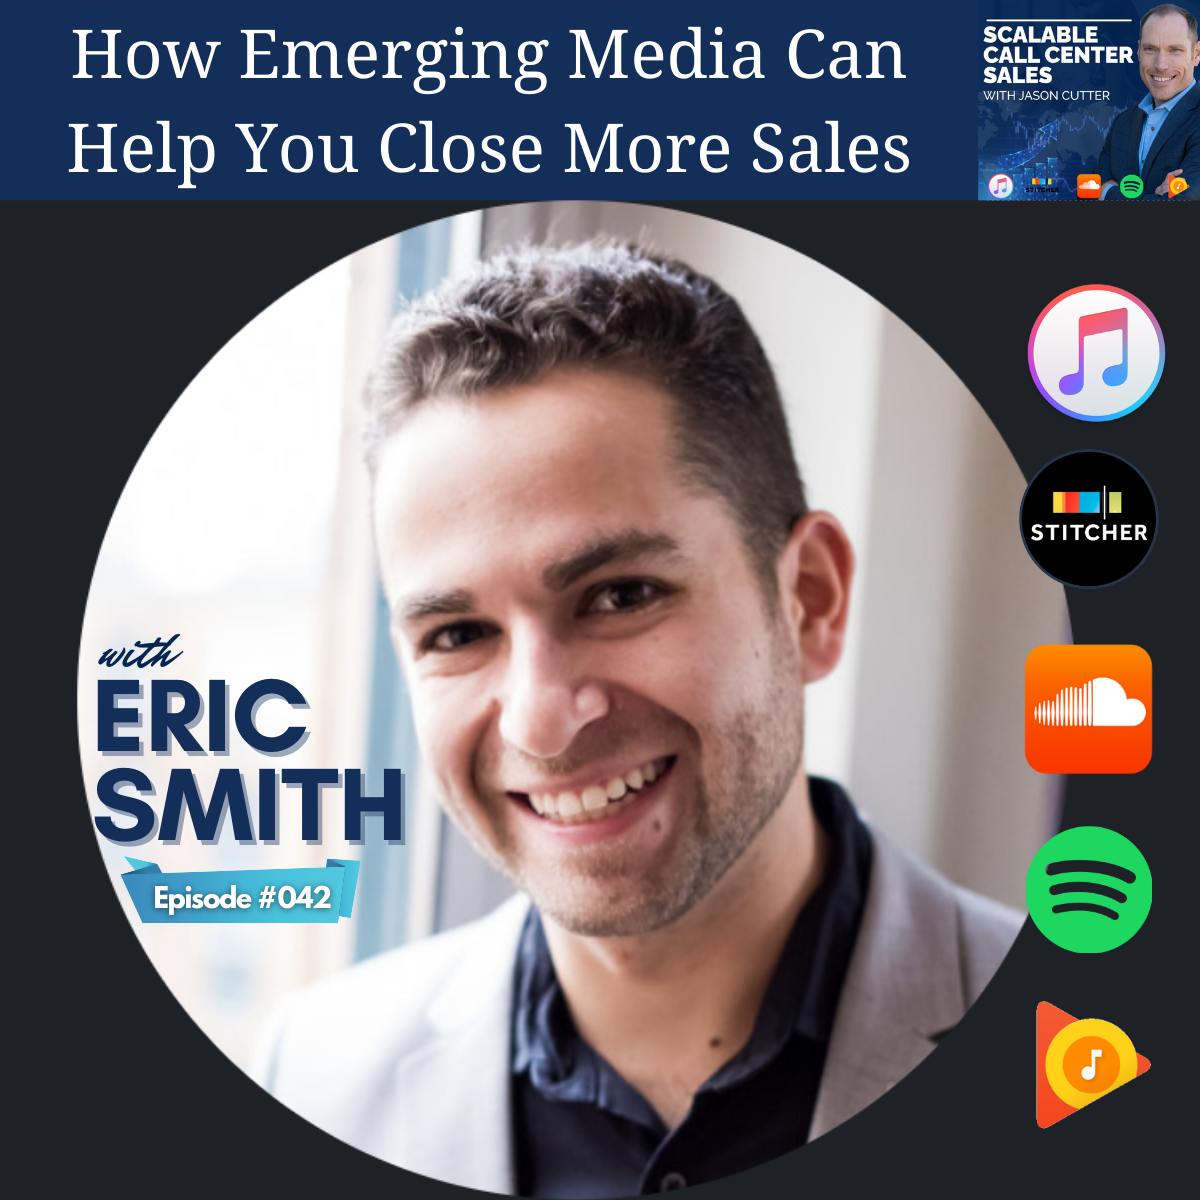 [042] How Emerging Media Can Help You Close More Sales, with Eric Smith from Incremental Media